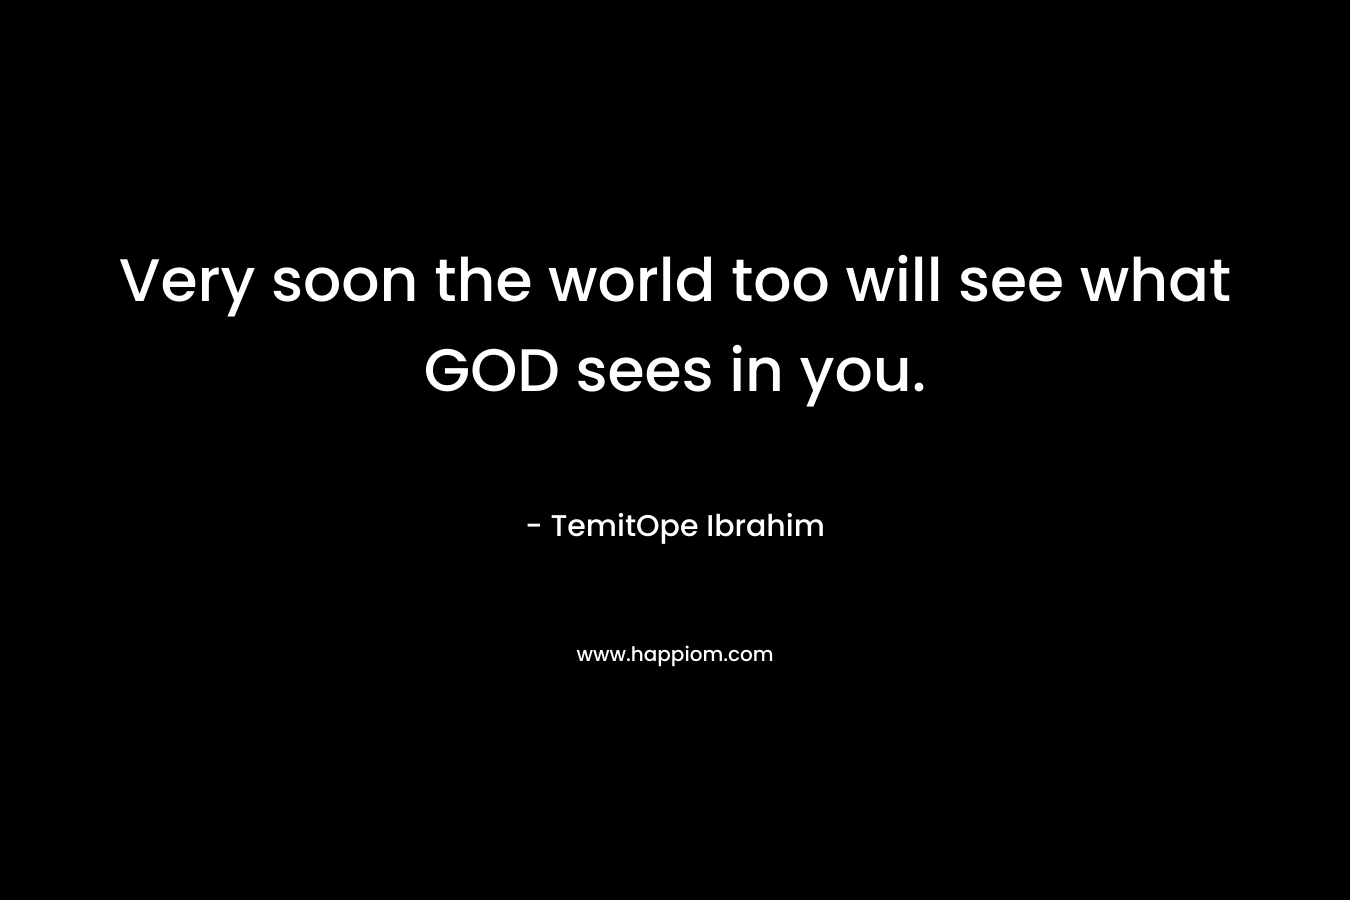 Very soon the world too will see what GOD sees in you.